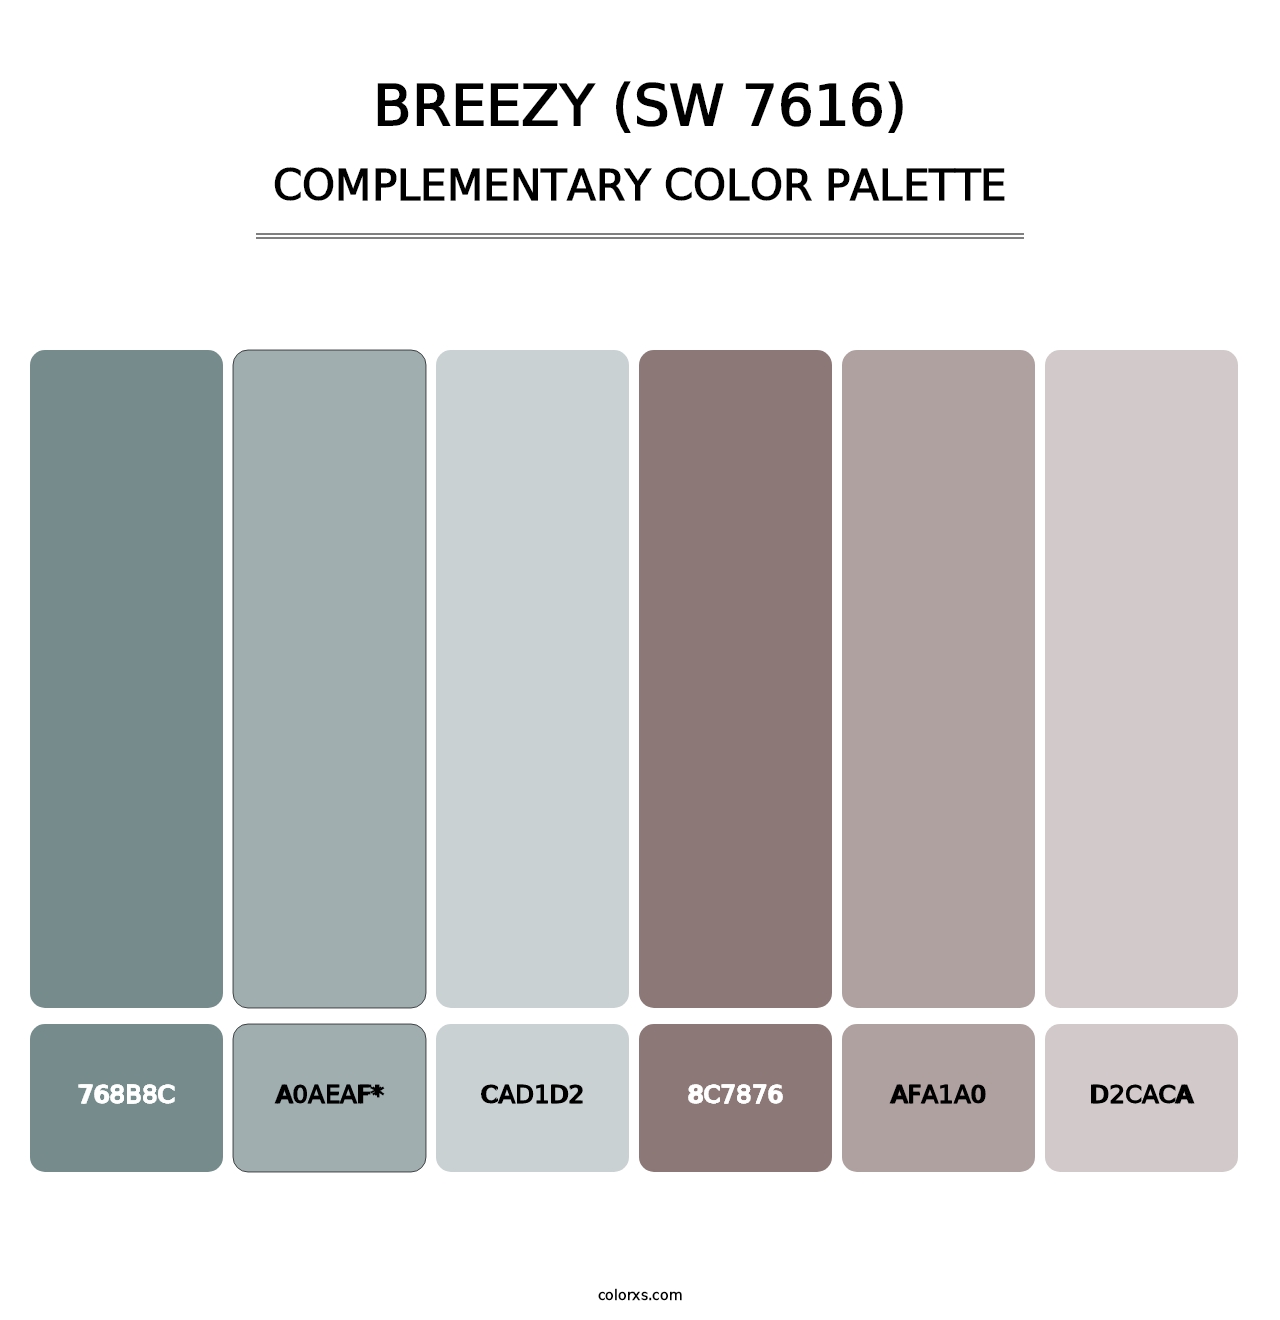 Breezy (SW 7616) - Complementary Color Palette